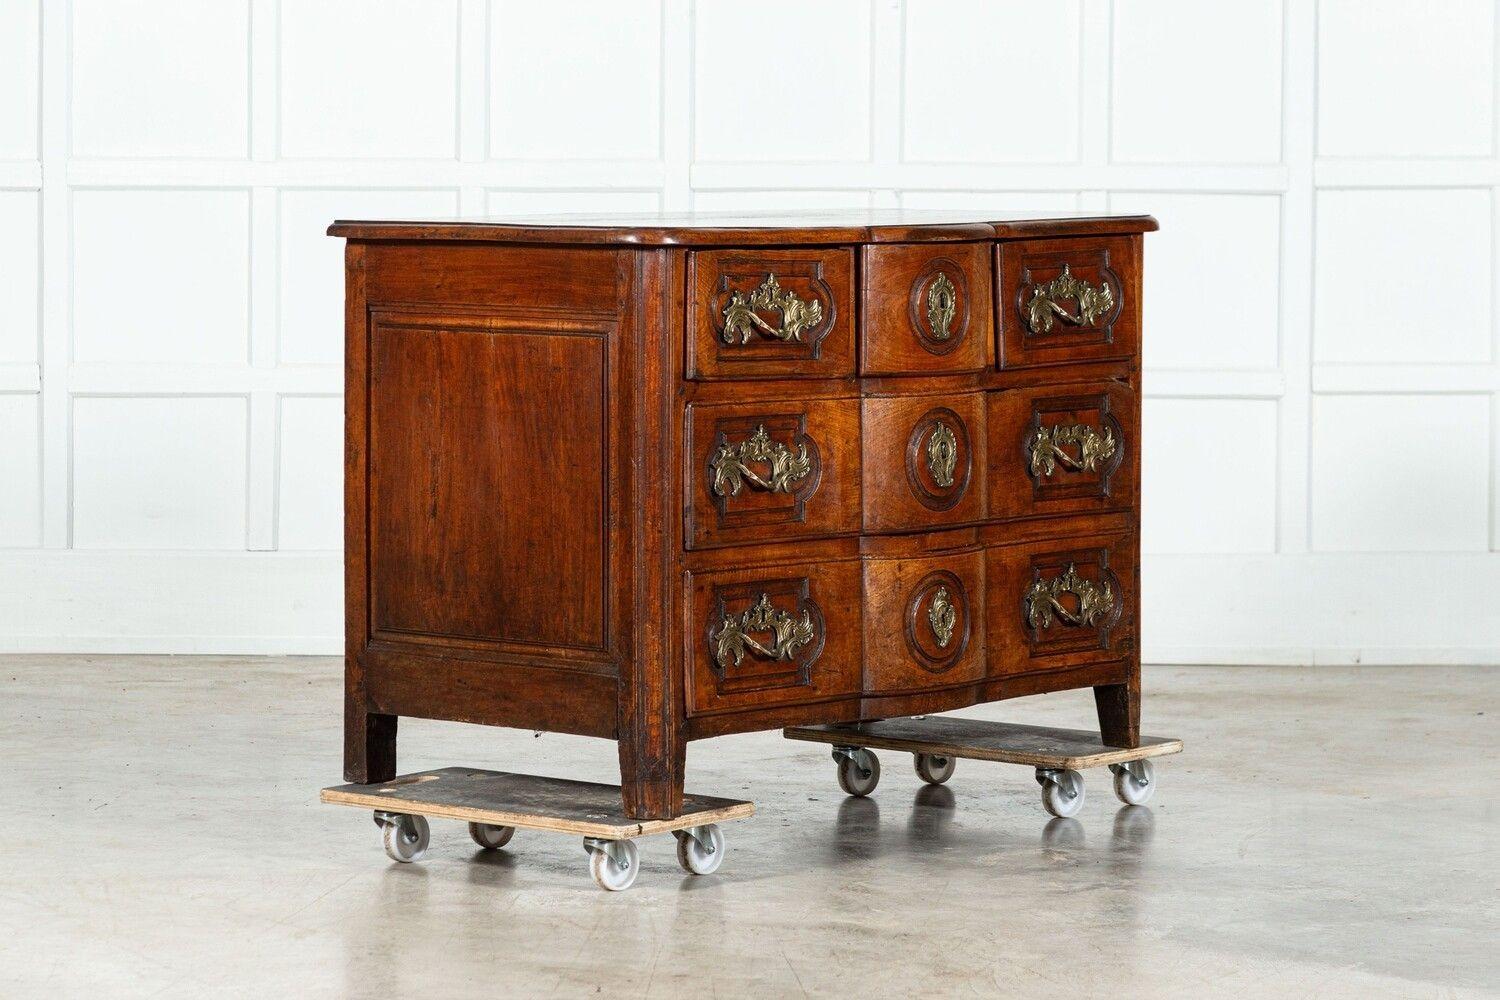 circa 1725
18thC Provincial Louis XV Fruitwood Serpentine Commode
sku 1781
Provenance: Property from the estate of the late David Cornwell, best known as the author John le Carré.
W121 x D61 x H82 cm
Weight 81 Kg